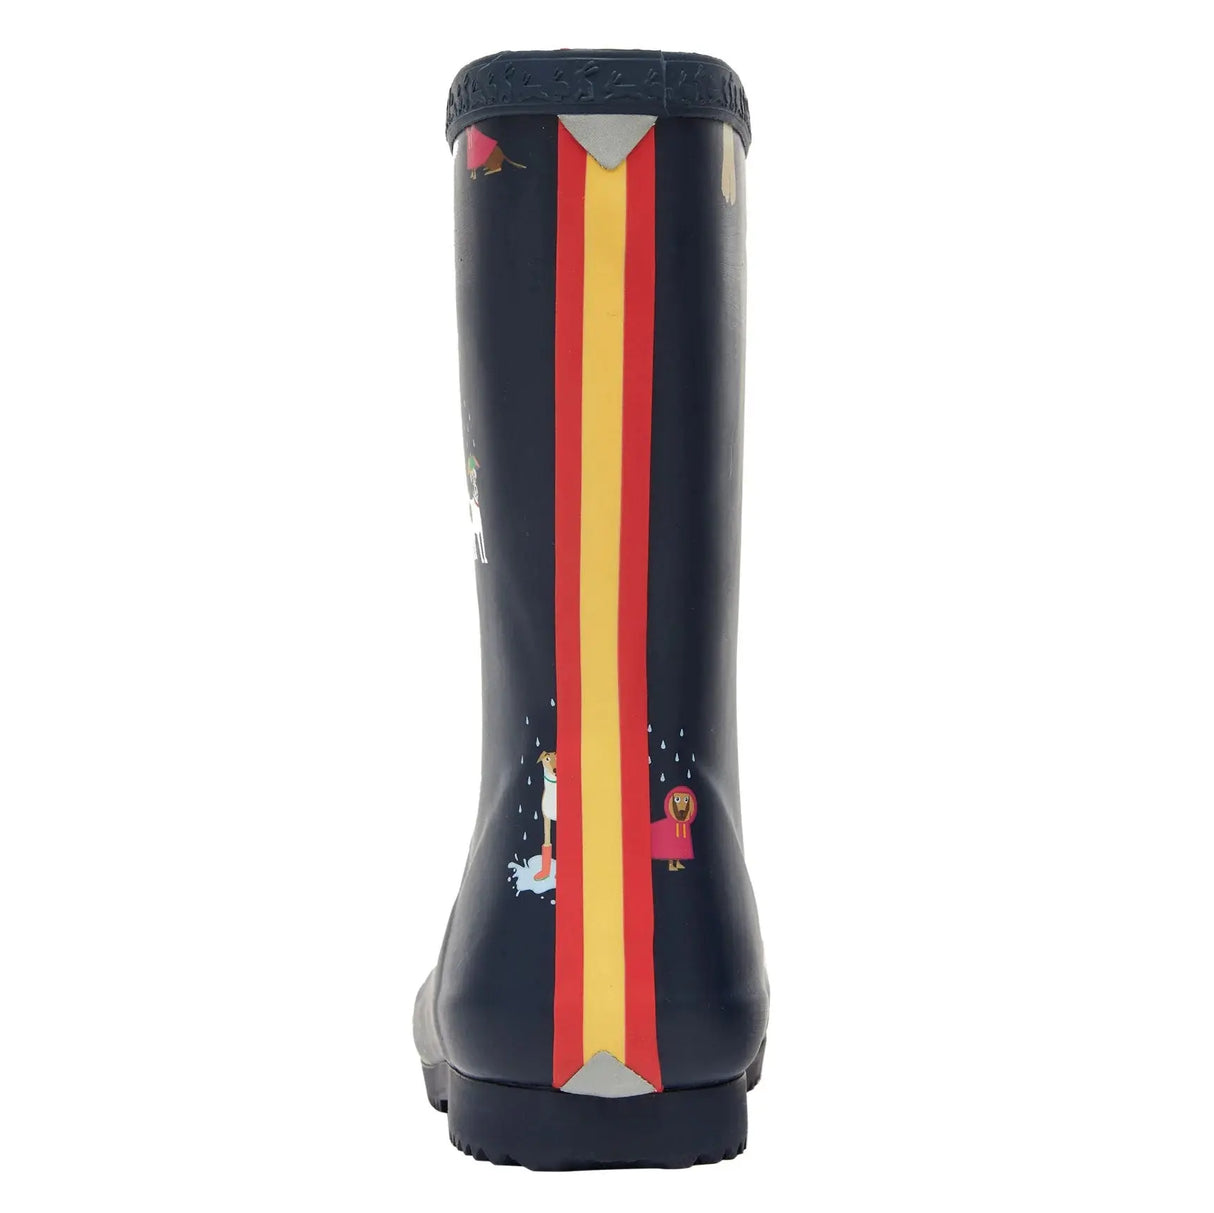 Multi Dogs Roll Up Flexible Printed Welly Rain Boots | Joules - Jenni Kidz